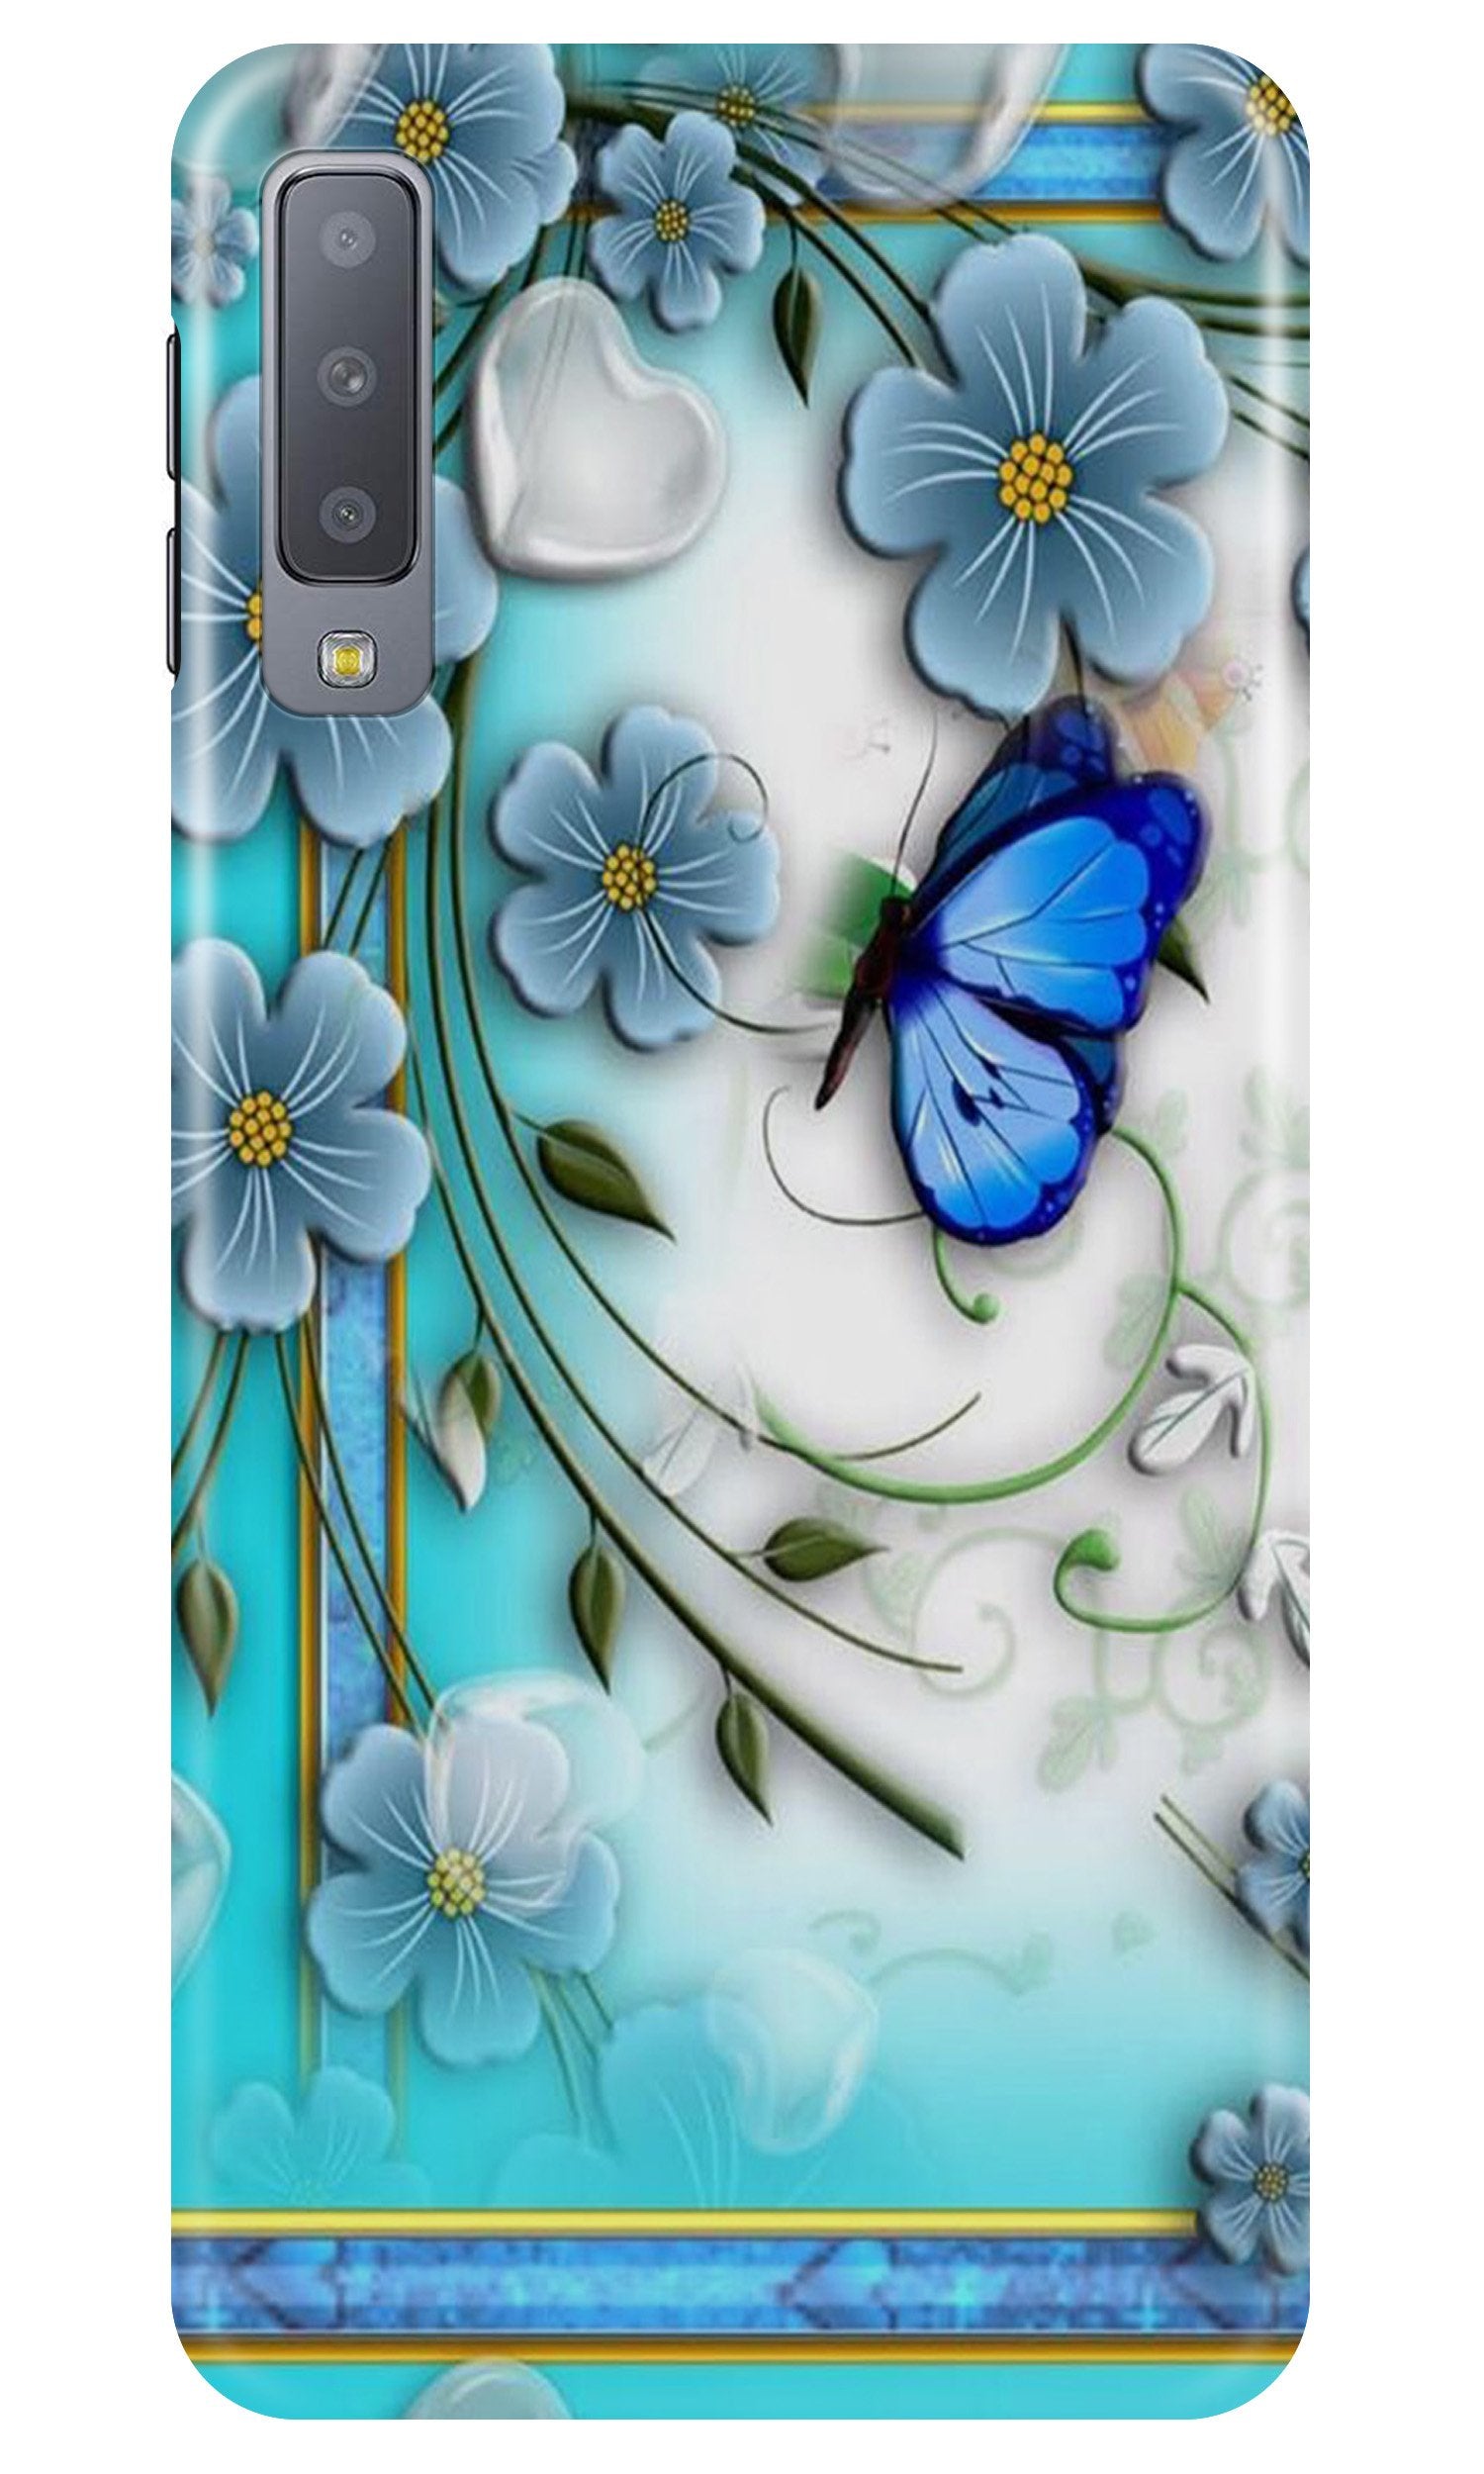 Blue Butterfly Case for Samung Galaxy A70s